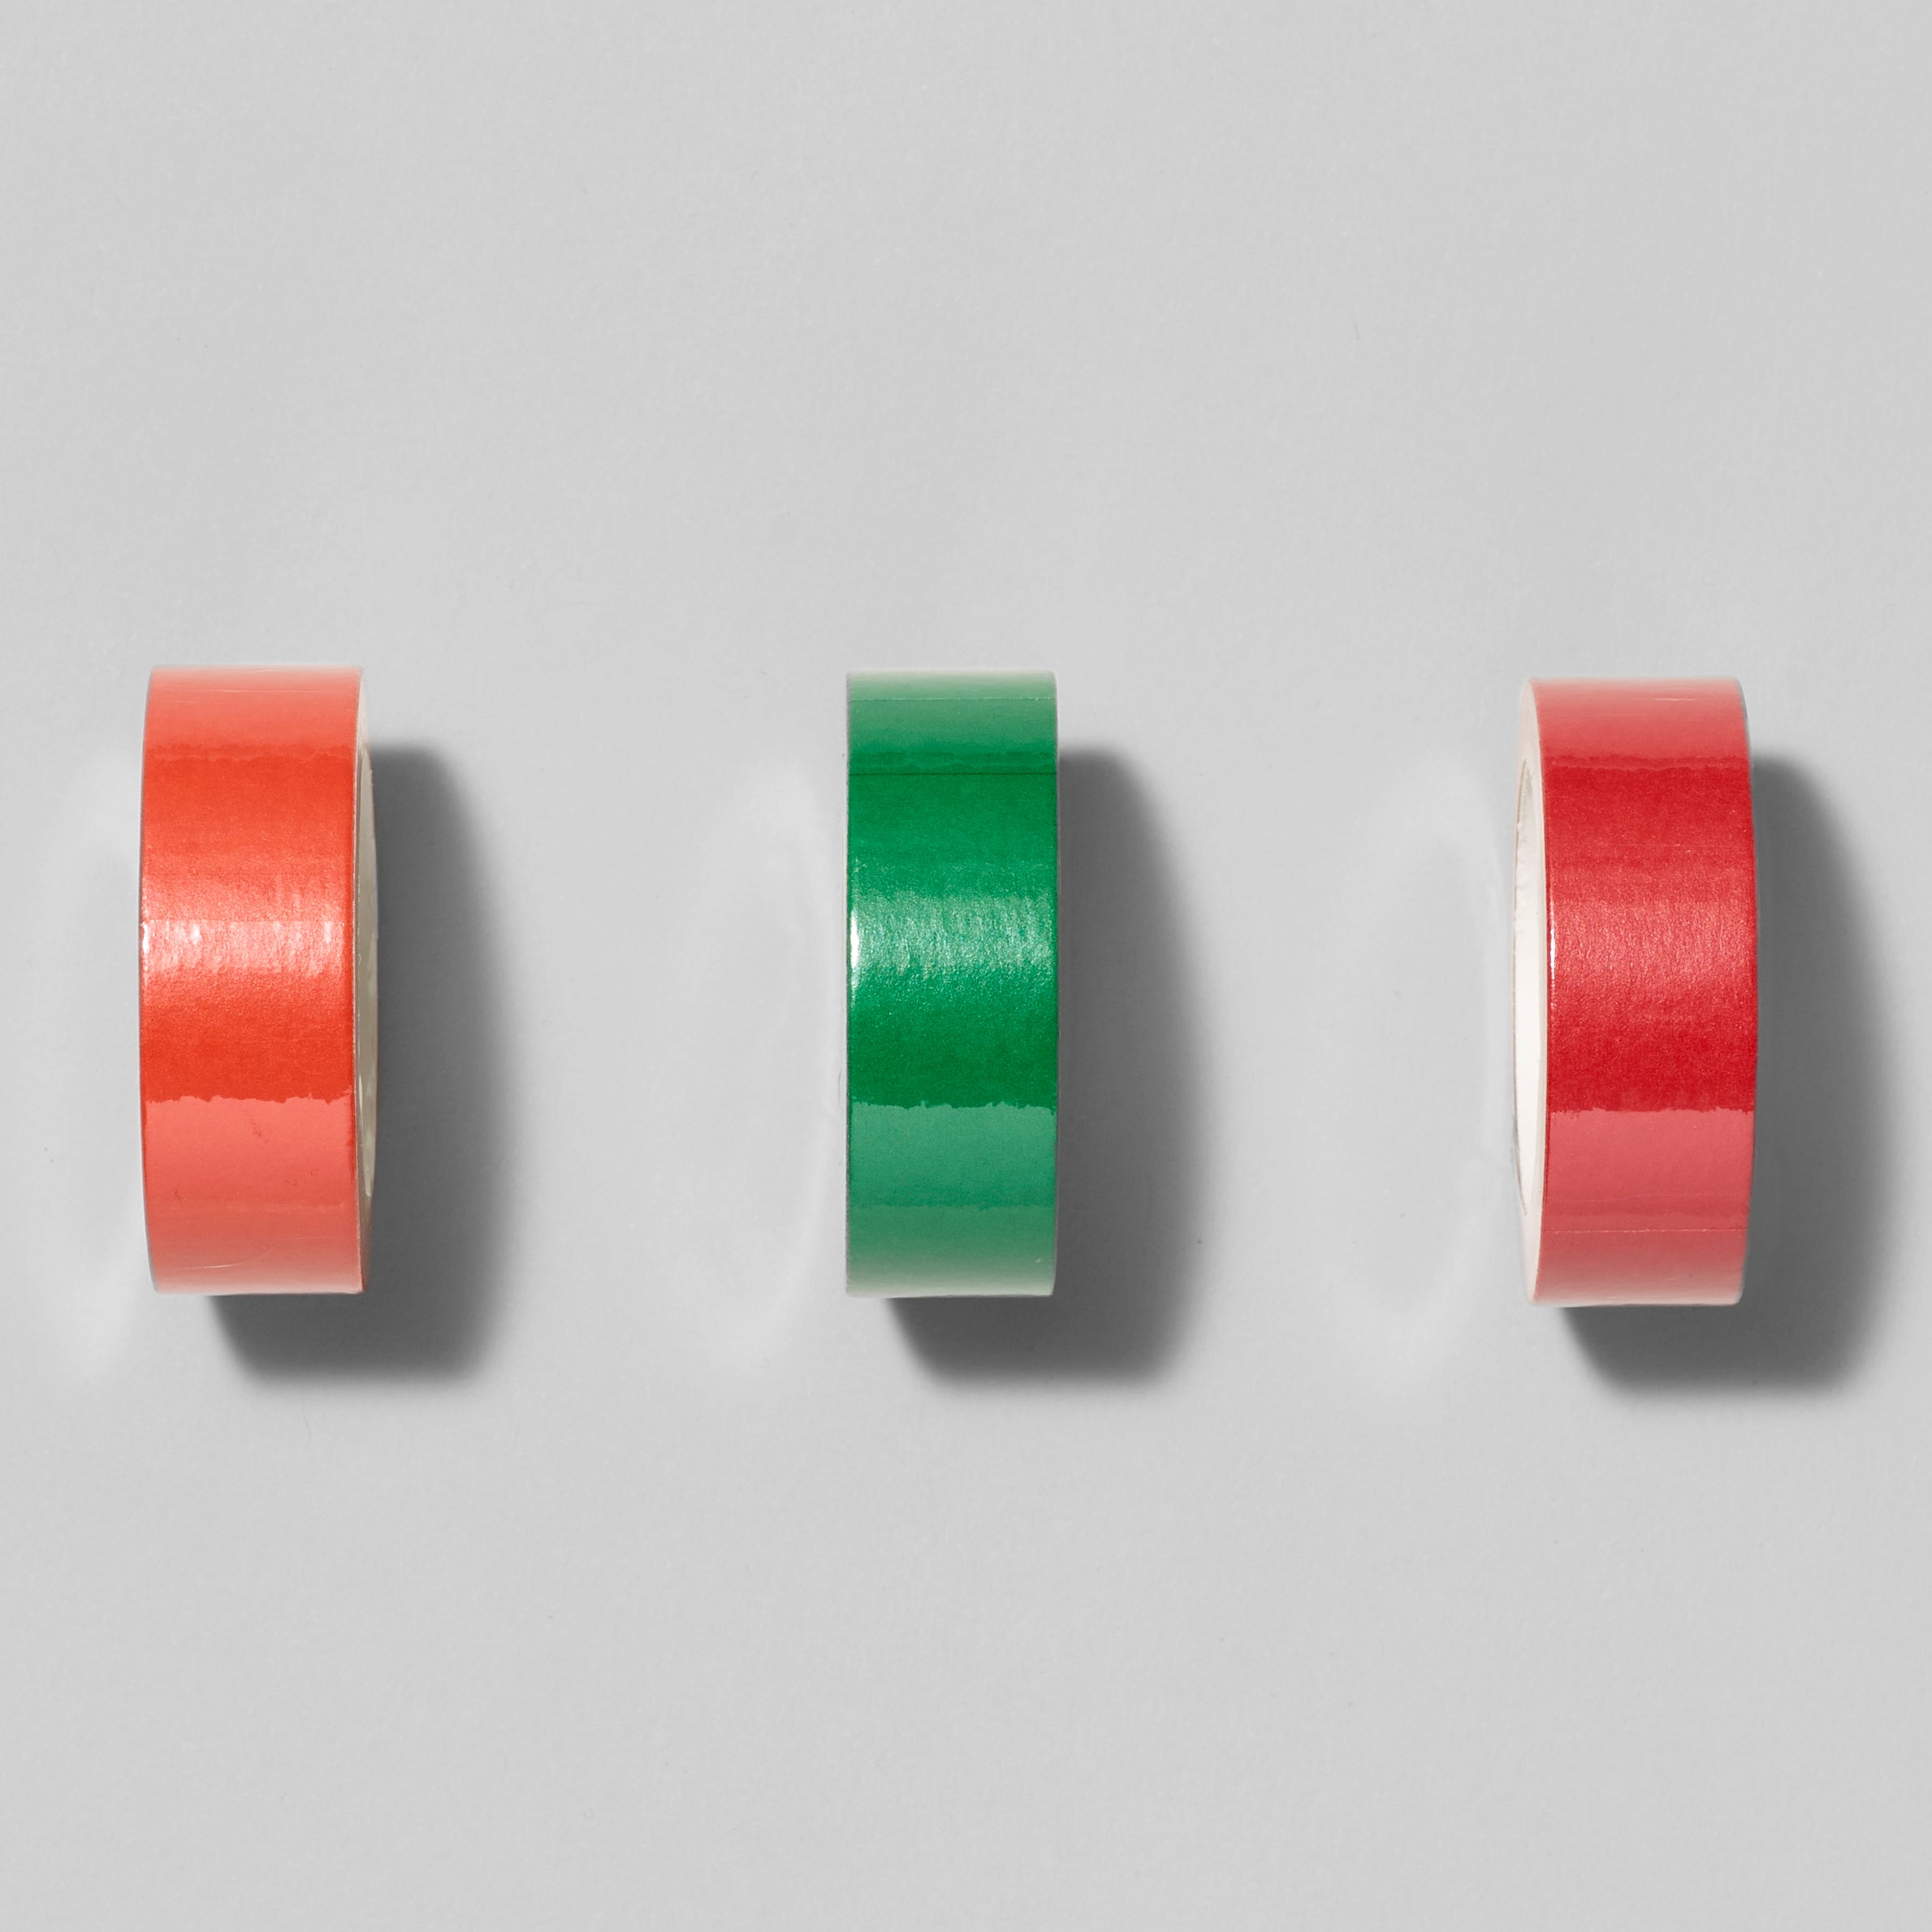 Assortment of Biennial Washi Tape in Orange, Green, and Red. Measures 1.75" in diameter